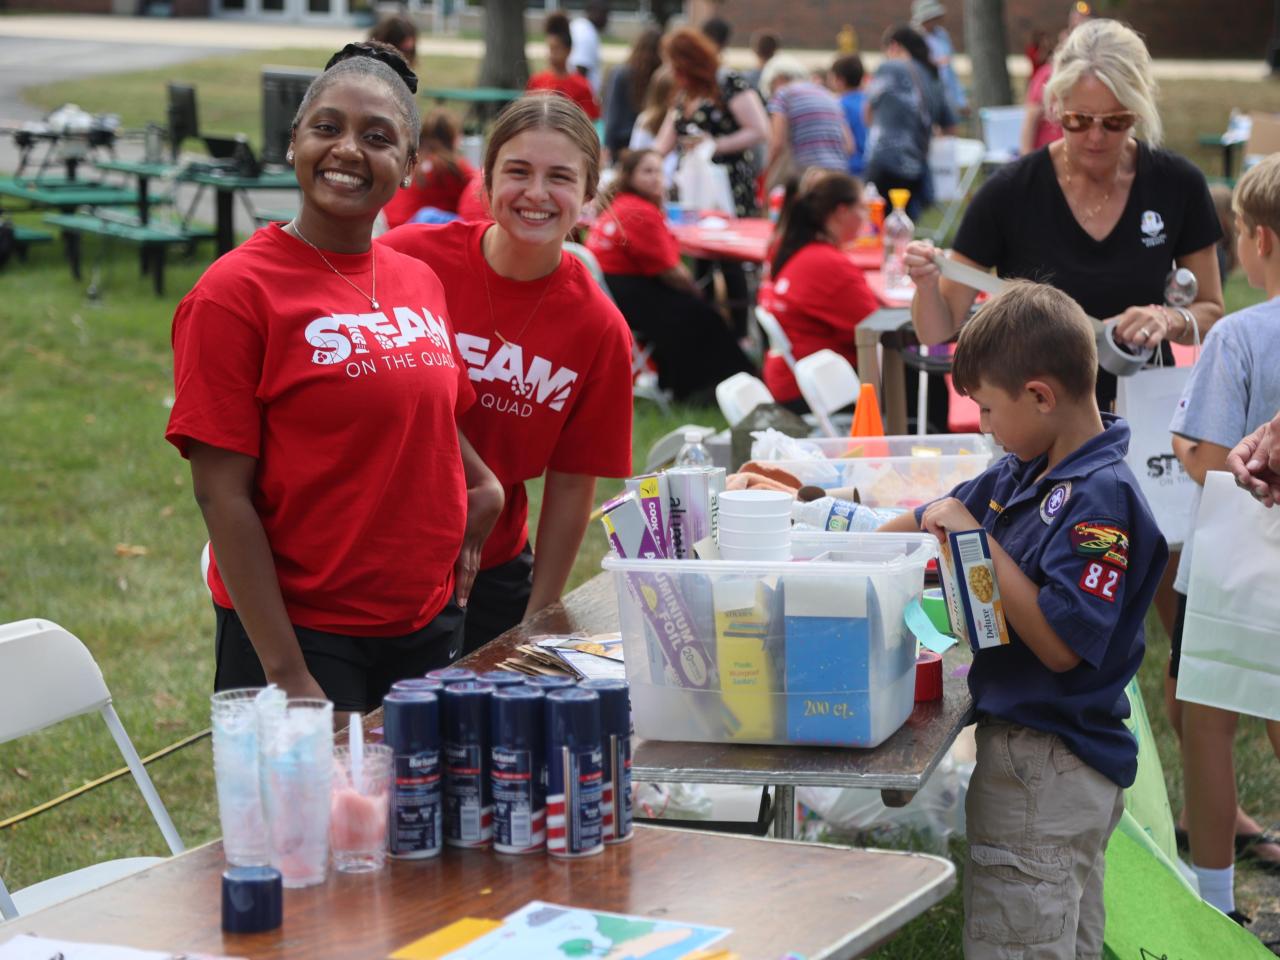 Students gather around a table at STEAM on the Quad